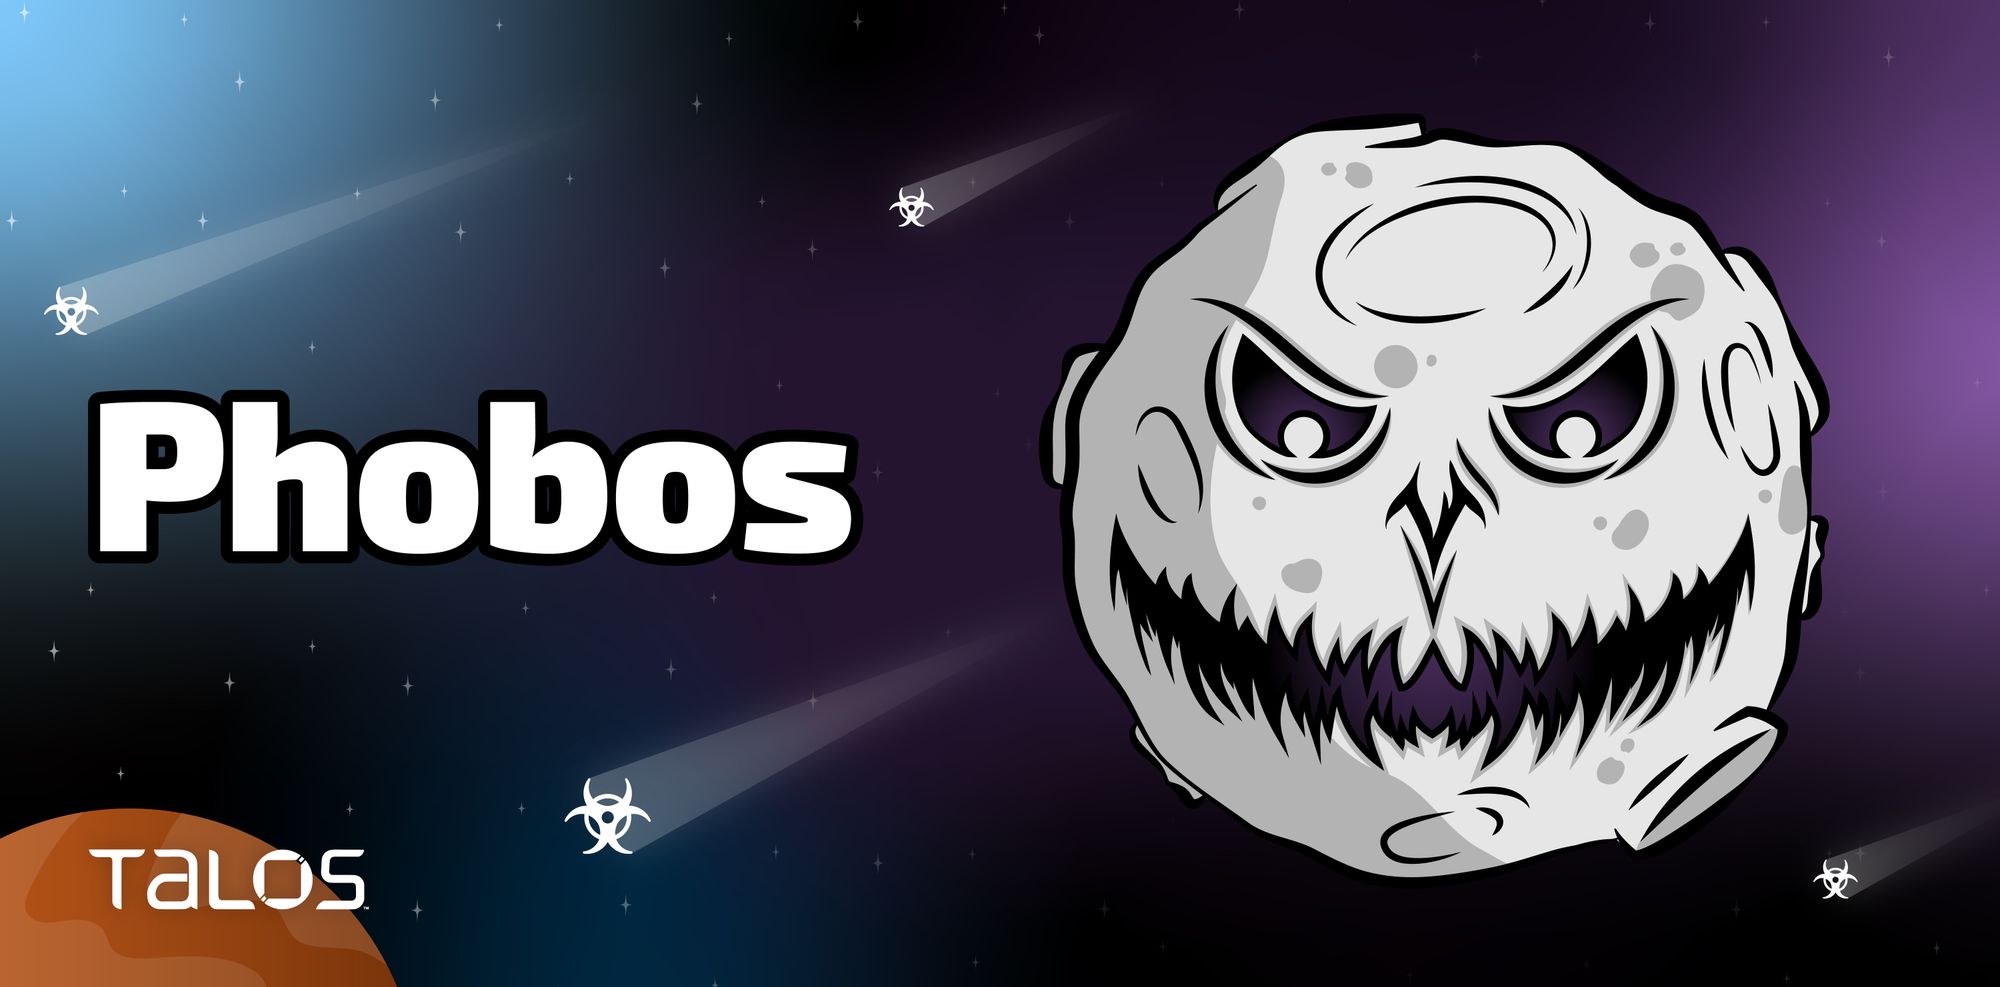 Understanding the Phobos affiliate structure and activity